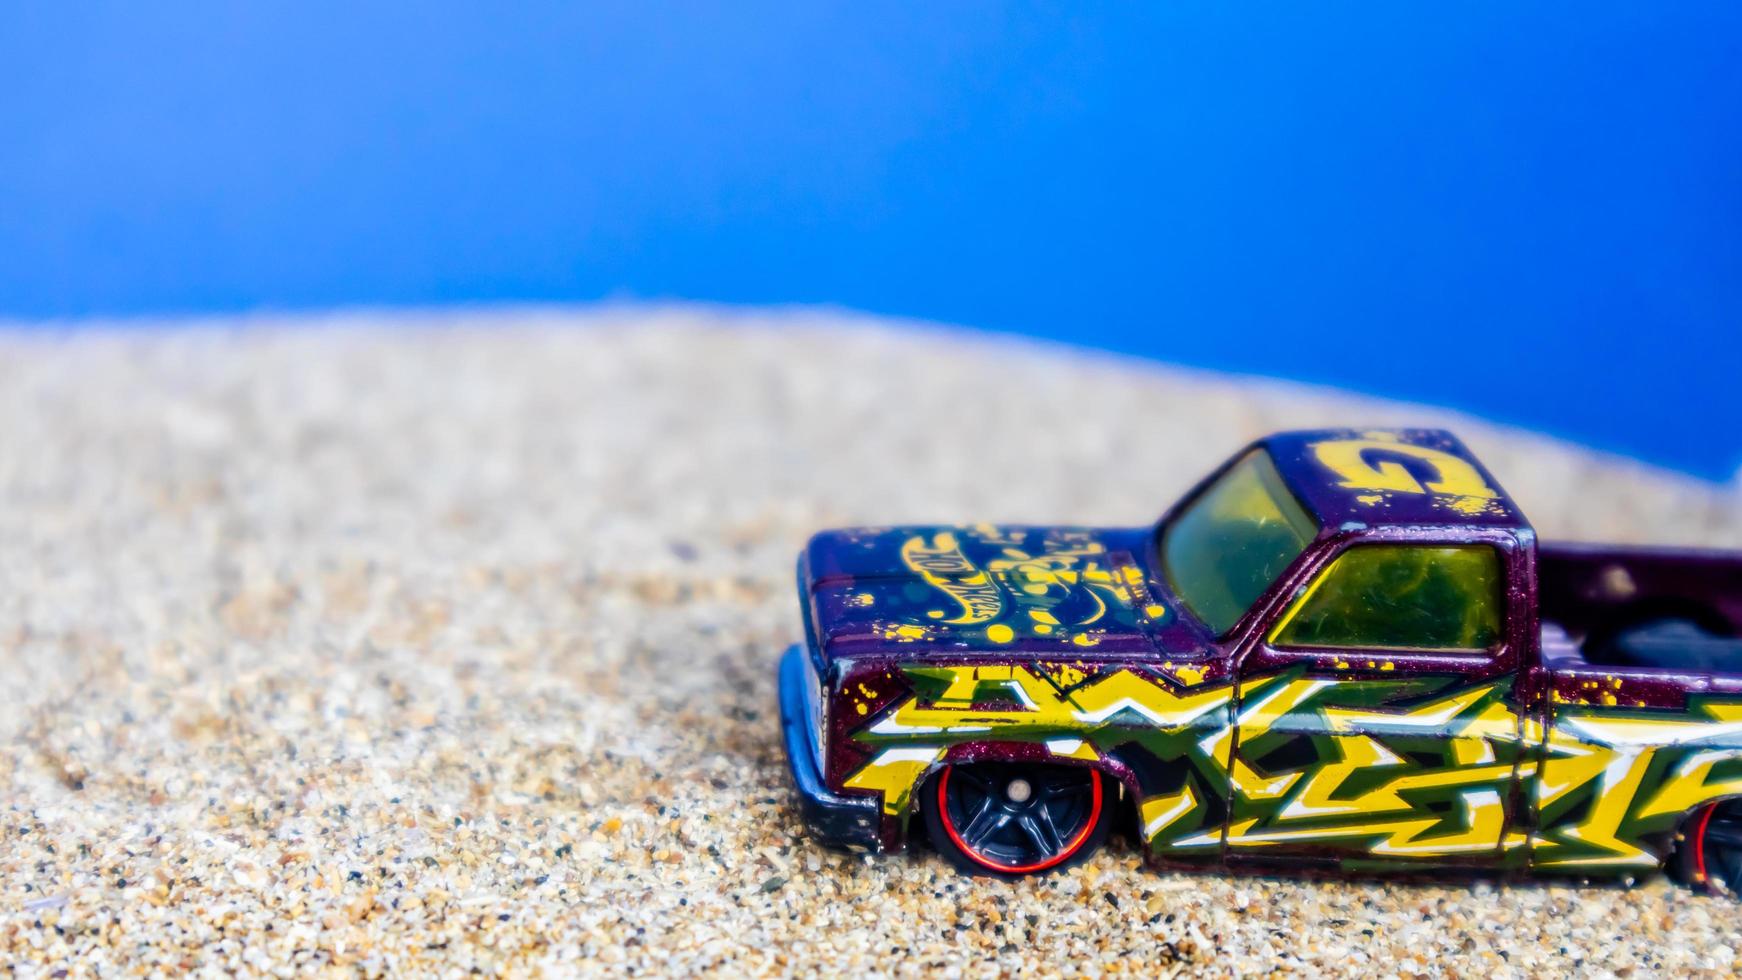 Minahasa, Indonesia  Monday, 12 December 2022, toy car on the sand on a blue background photo